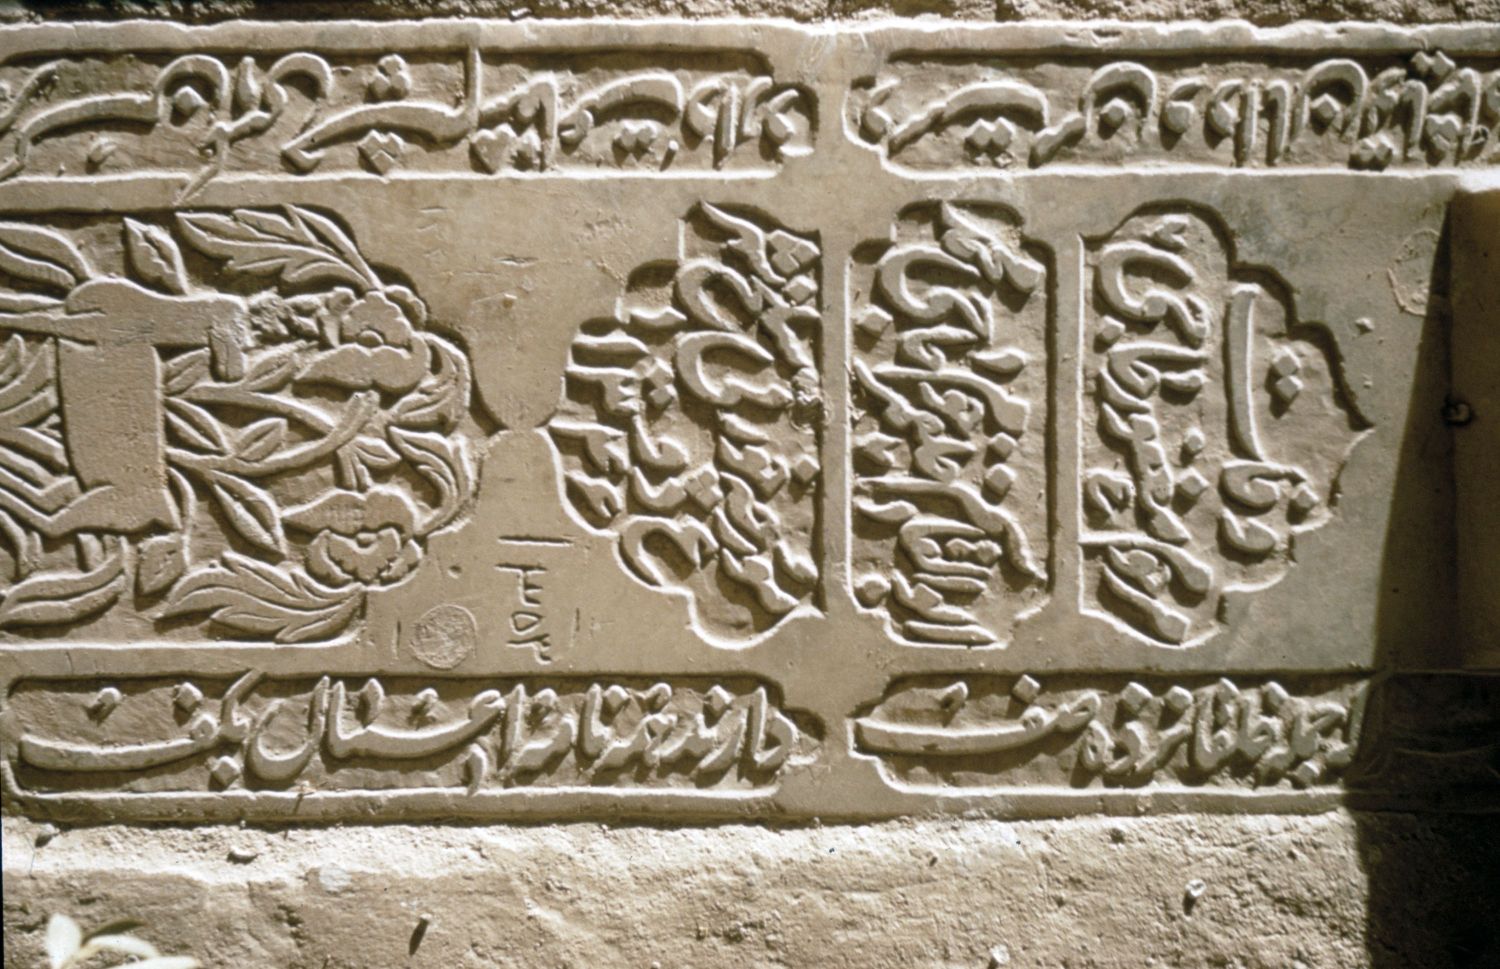 View of inscriptions on a tombstone in a cemetery near Isfahan, Iran.